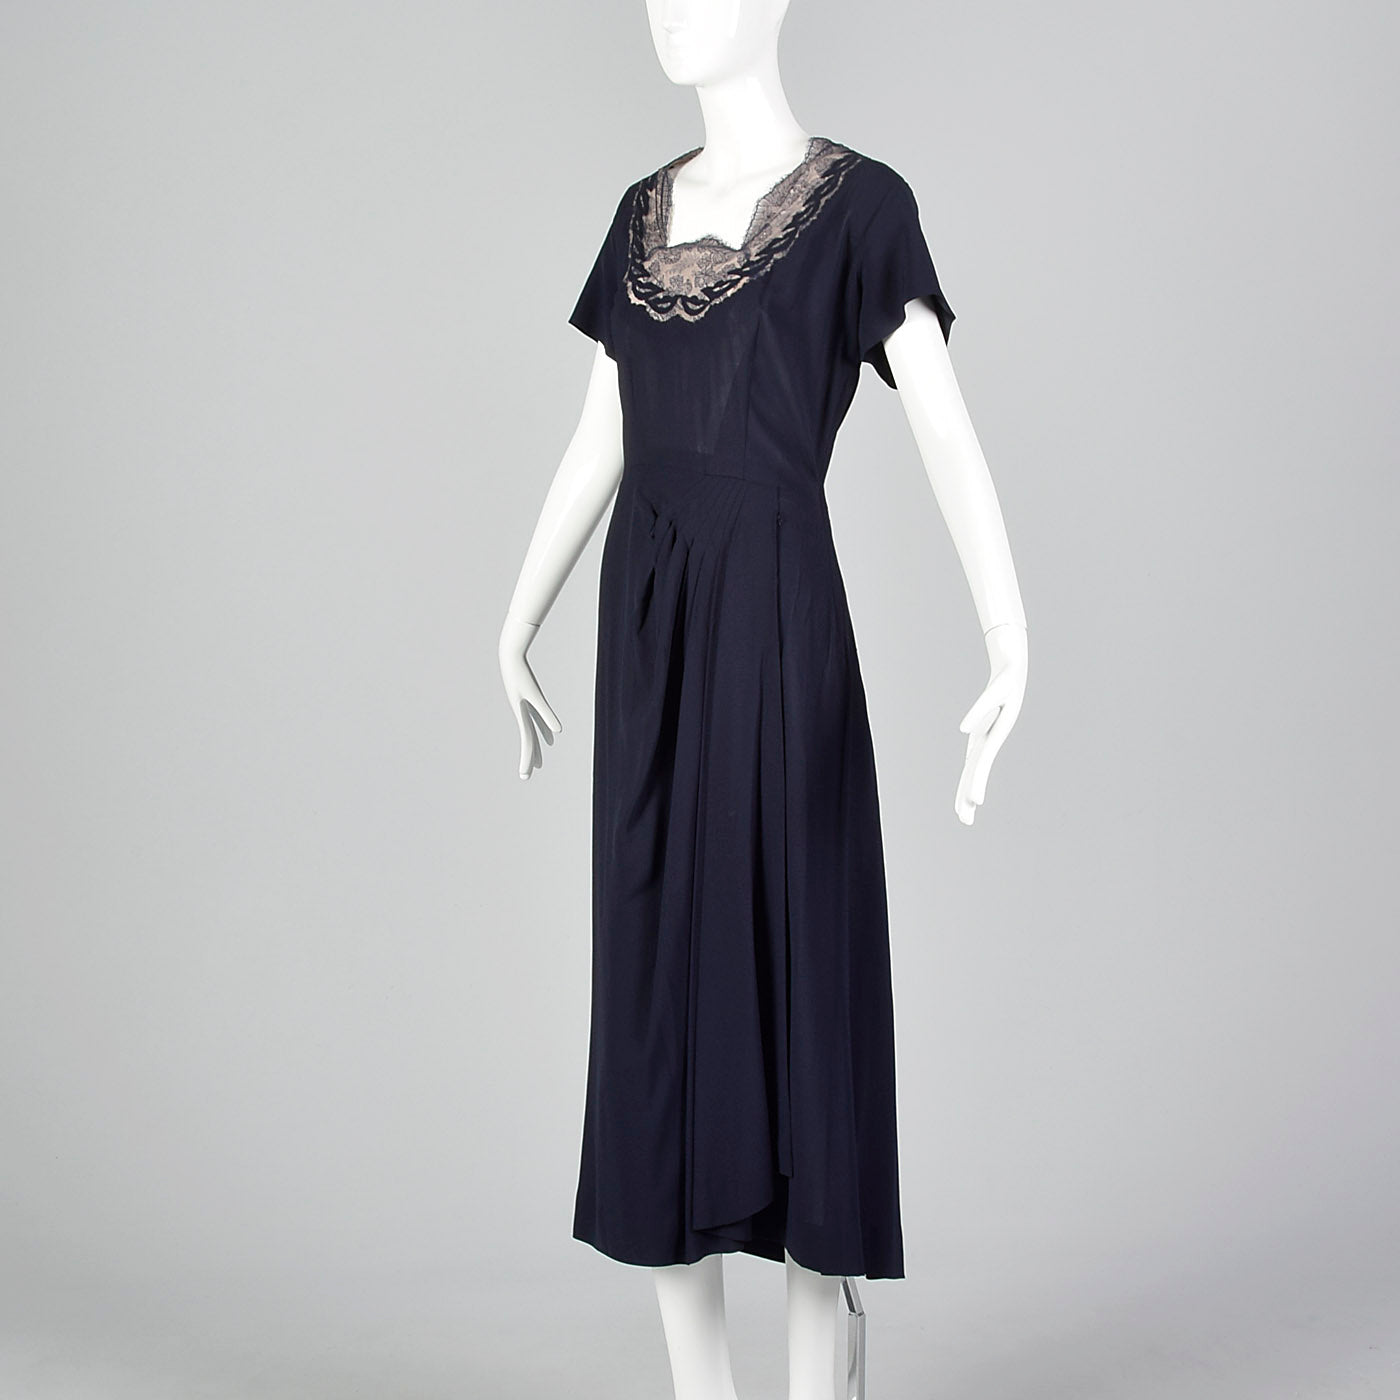 1950s Blue Rayon Dress with Lace Illusion Neckline